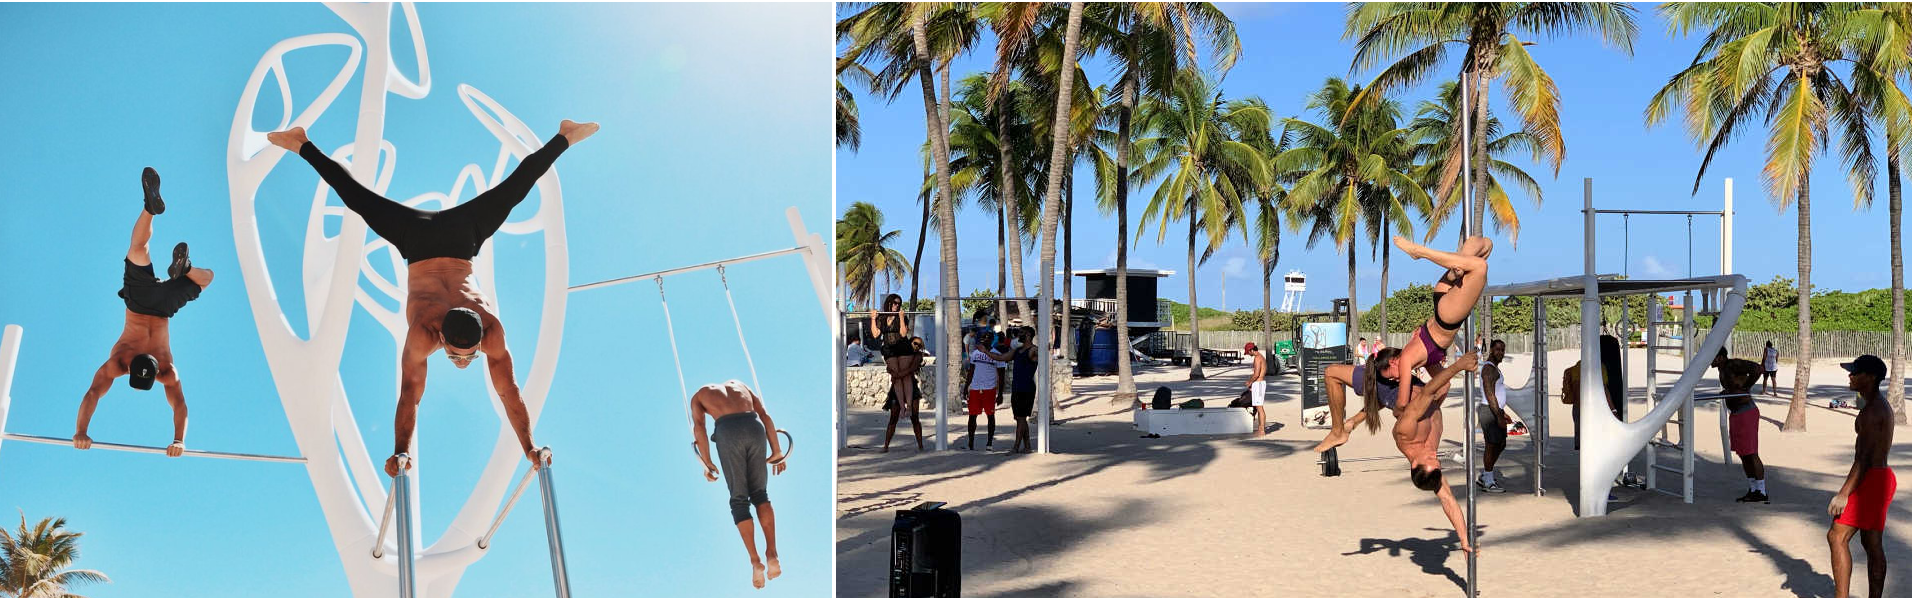 Muscle Beach is one of the most important places along the Miami Beach boardwalk. It's constantly full of intimidatingly fit people doing extremely impressive things, and usually recording them for their Instagram or TikTok channels.